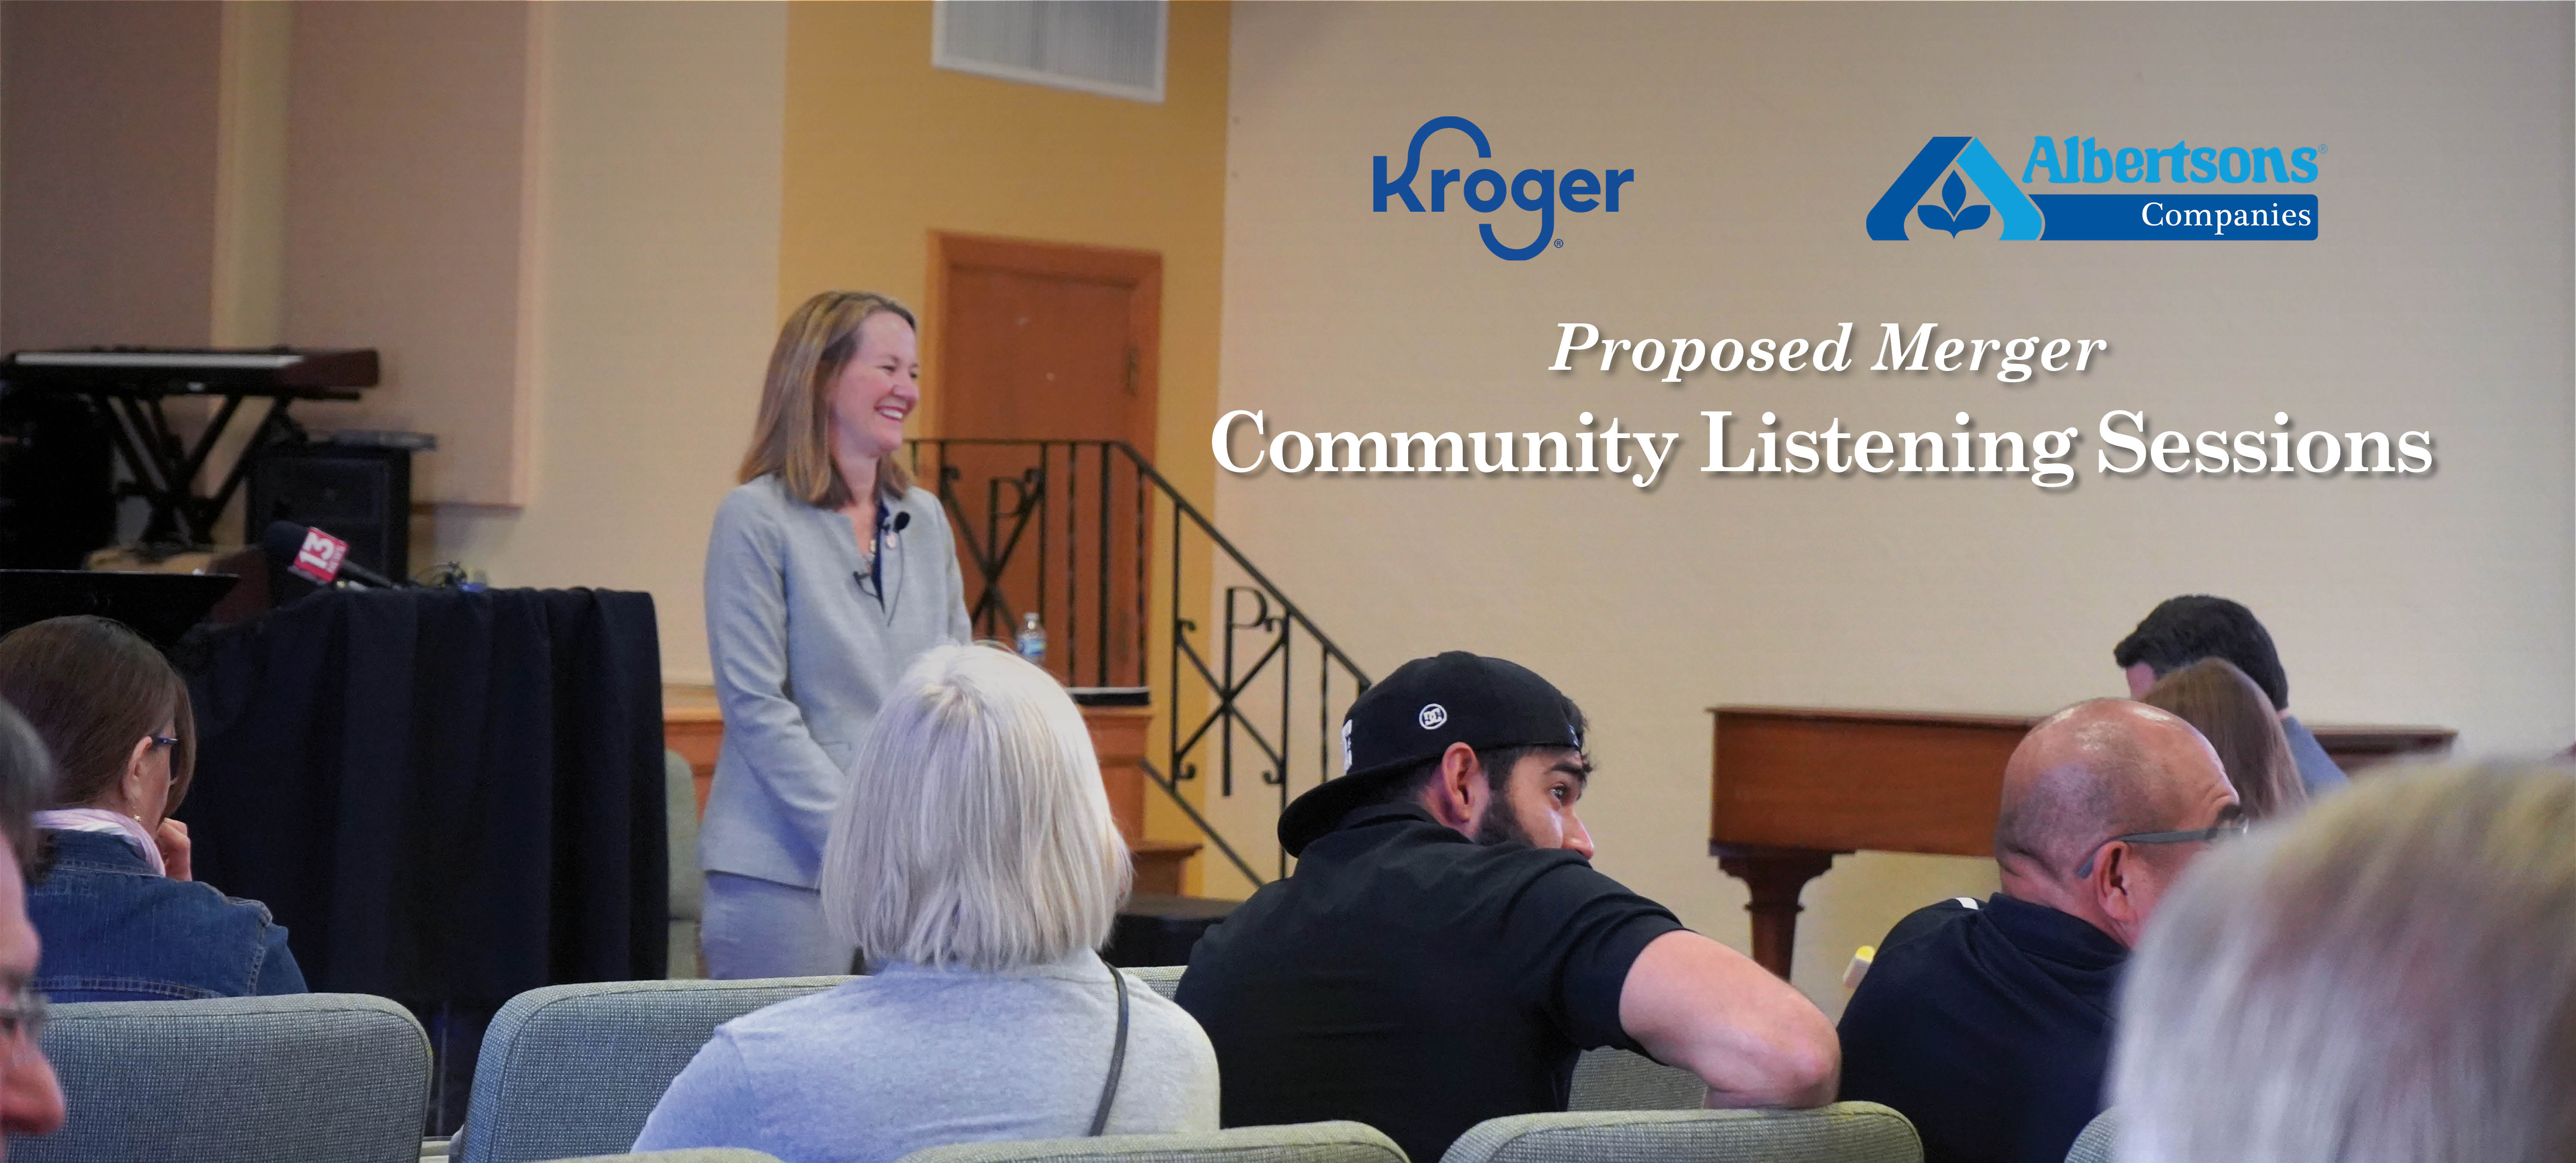 Image of AG Mayes in front of audience, Kroger logo, Albertson's logo, text that reads Proposed Merger Community Listening Sessions